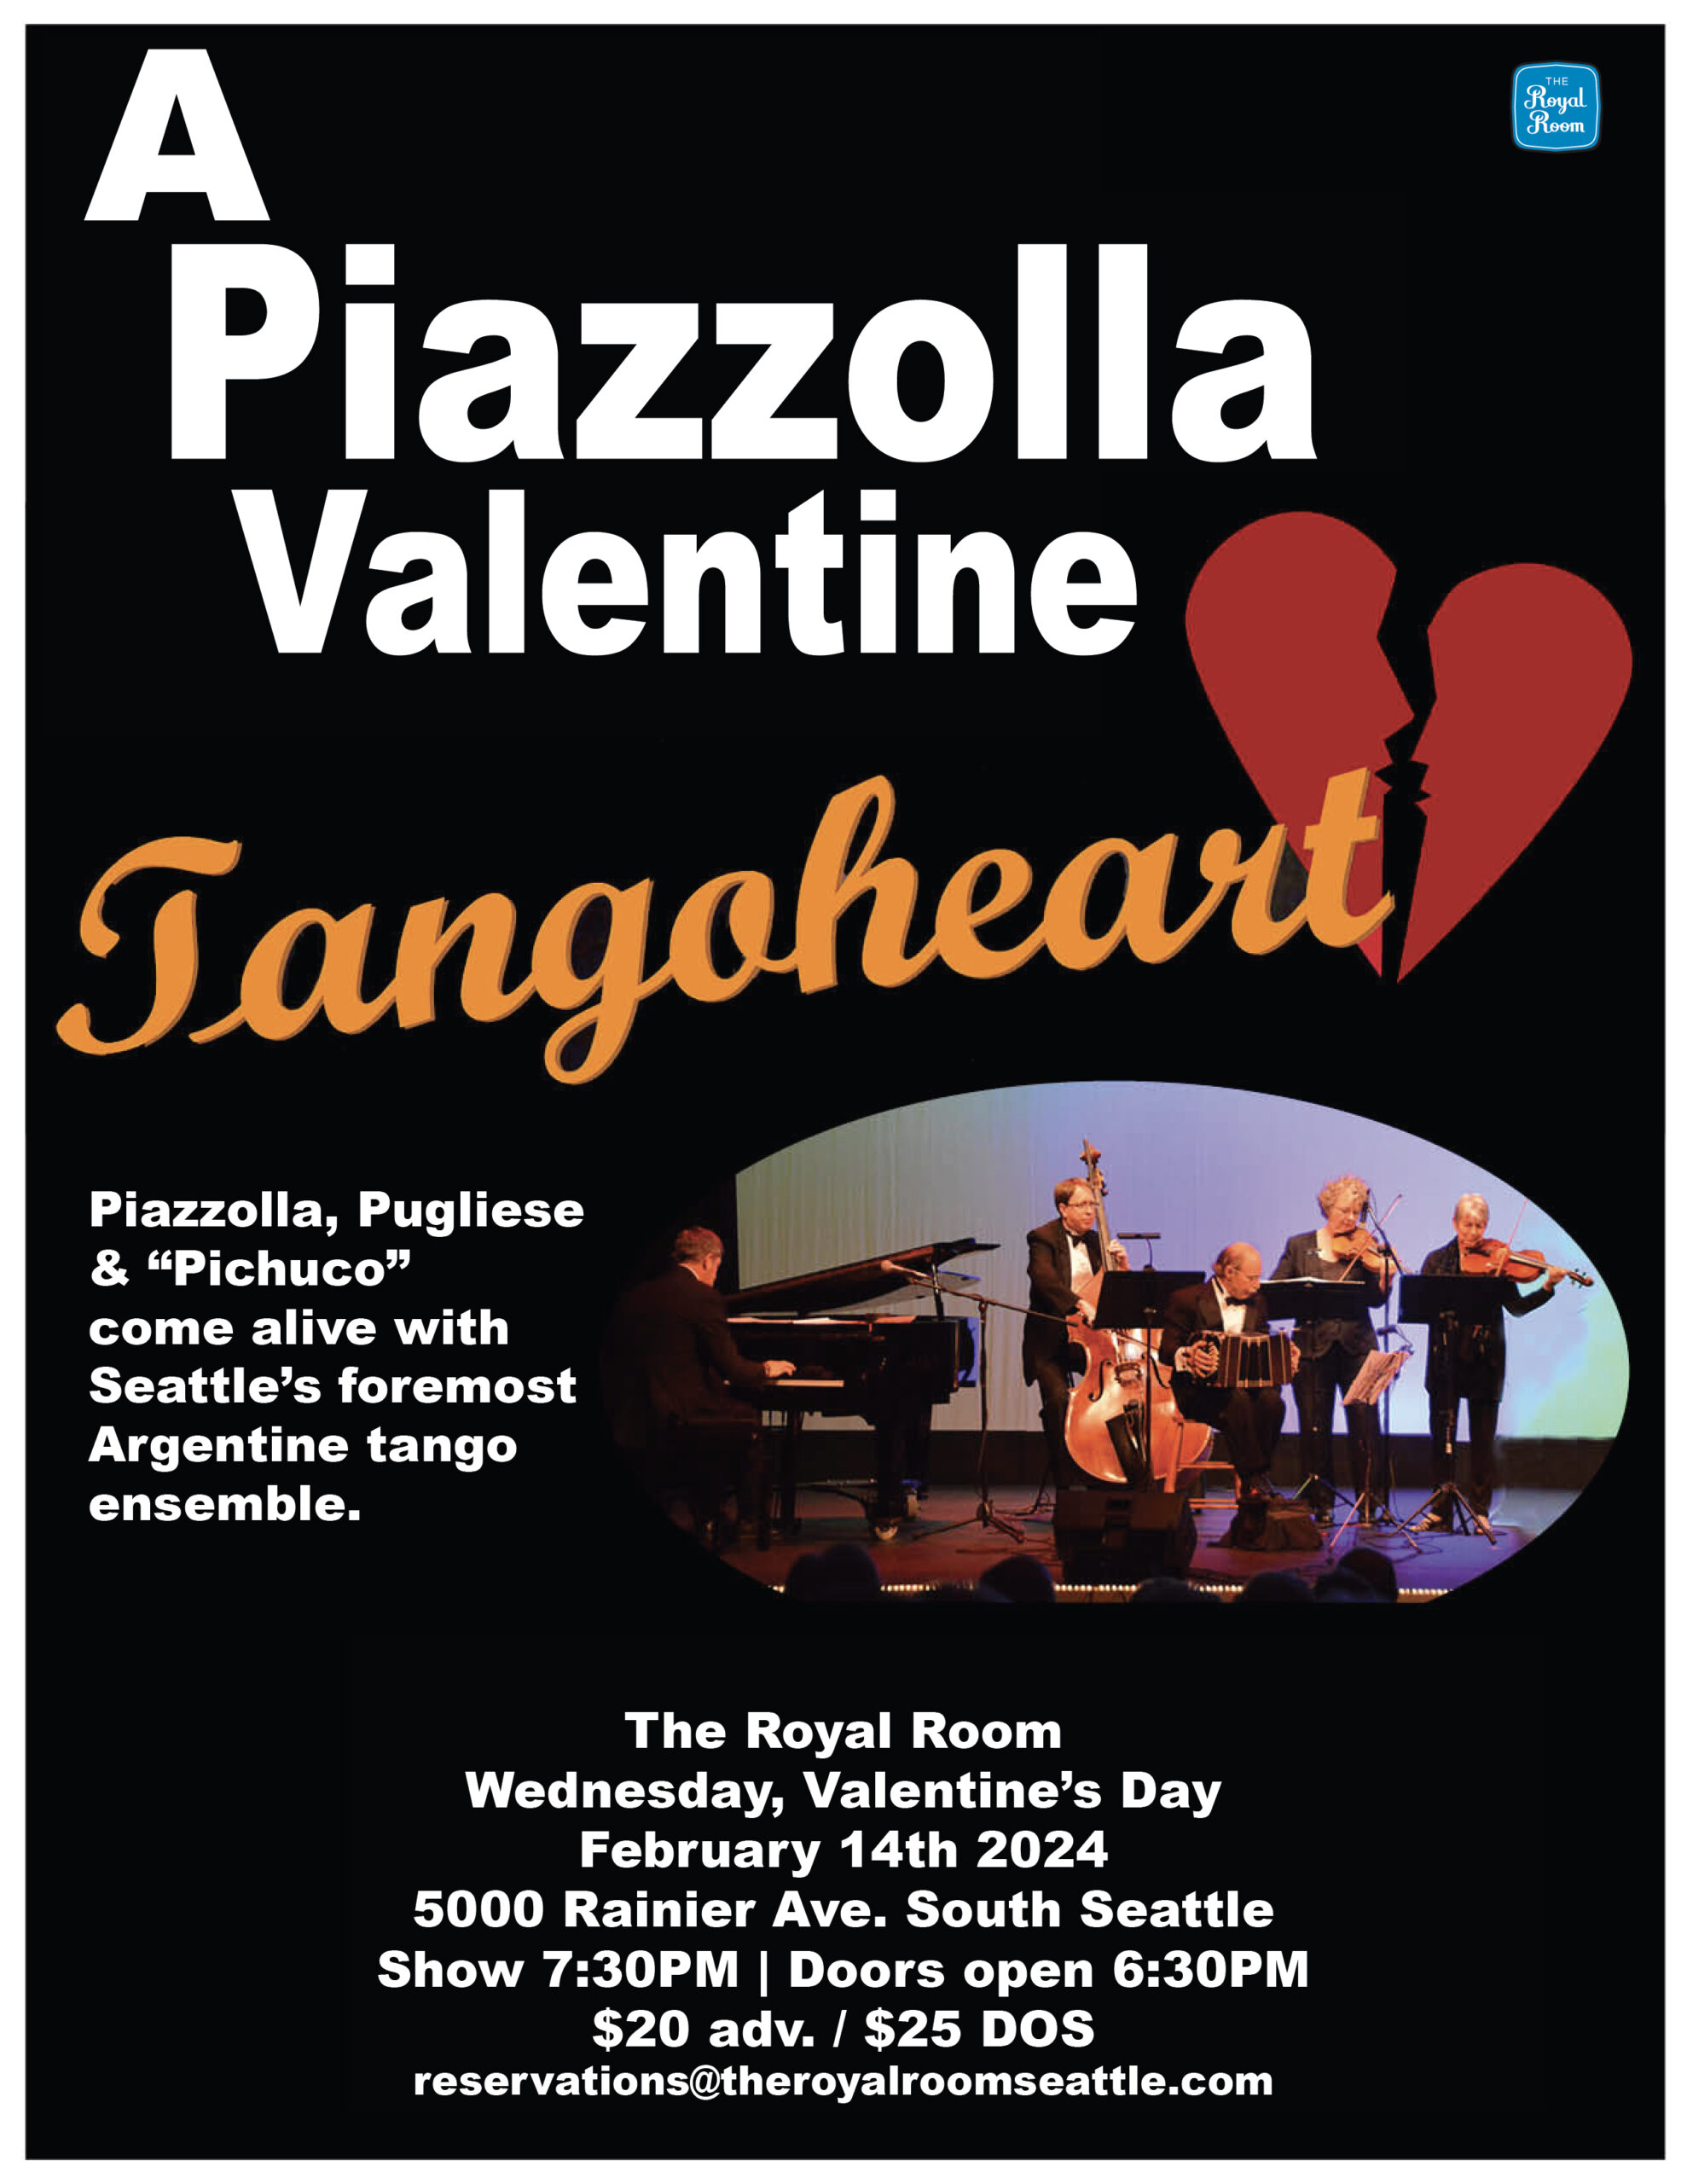 Tangoheart: A Piazzolla Valentine